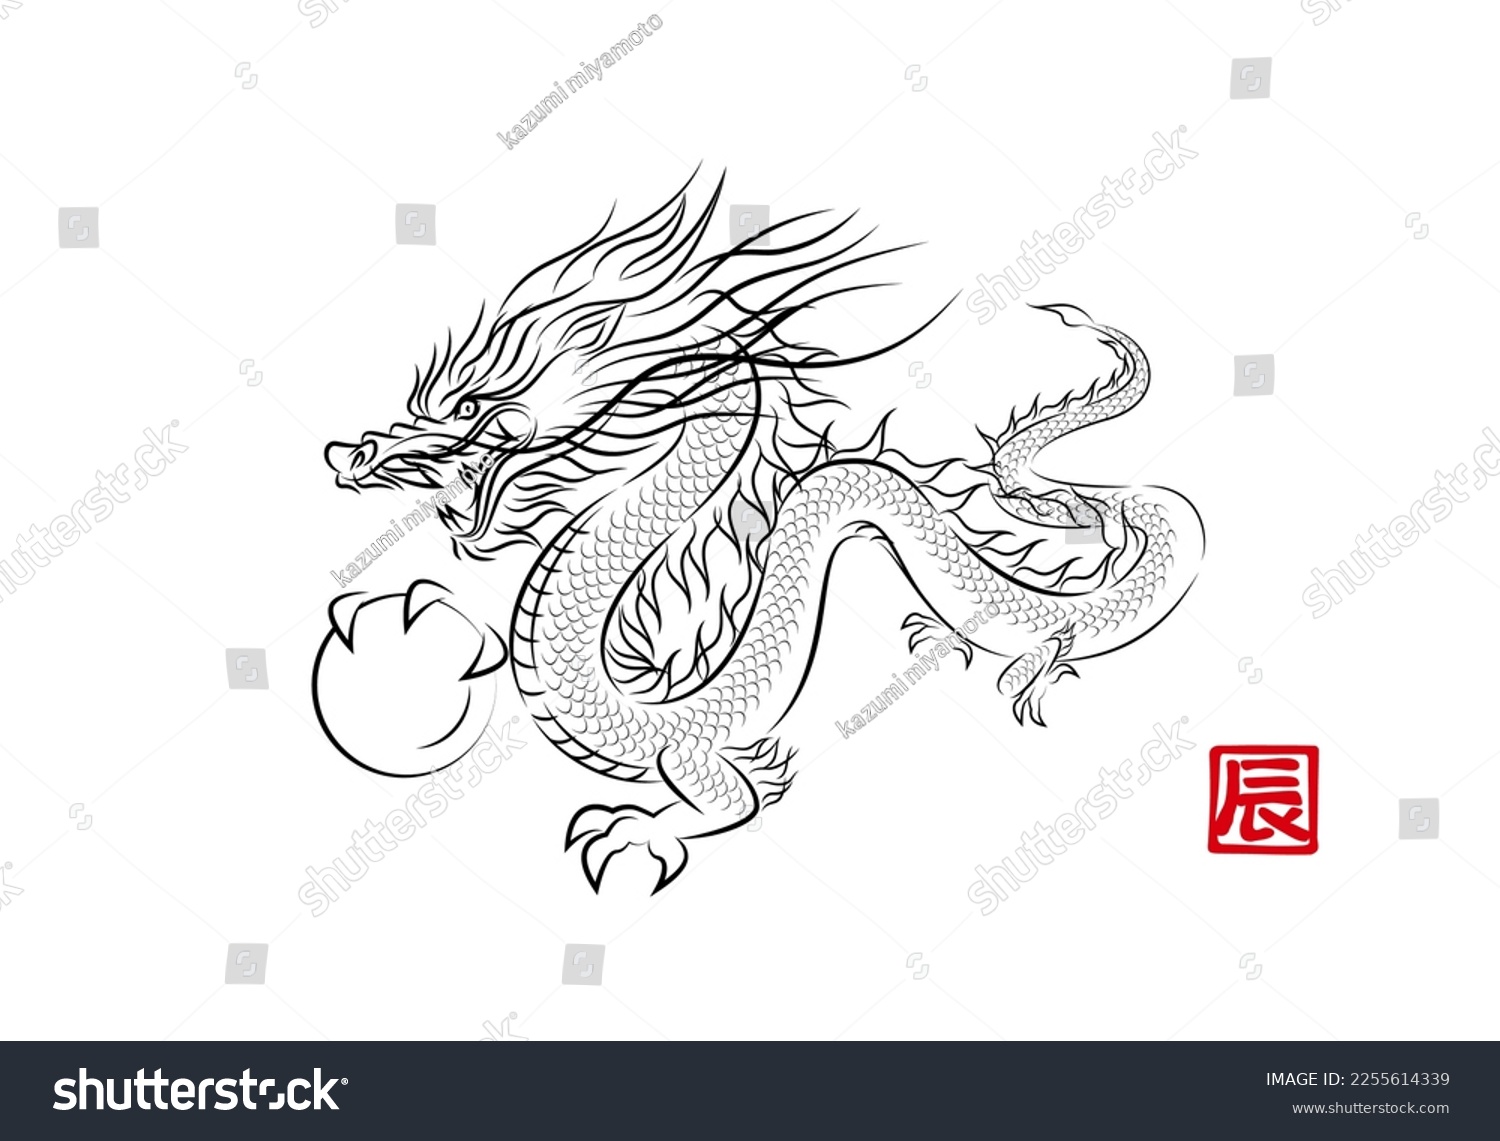 SVG of Stylish ink painting-style illustration of a divine dragon flying with dragon balls. Year of the Dragon New Year card material vector. 
辰 means 